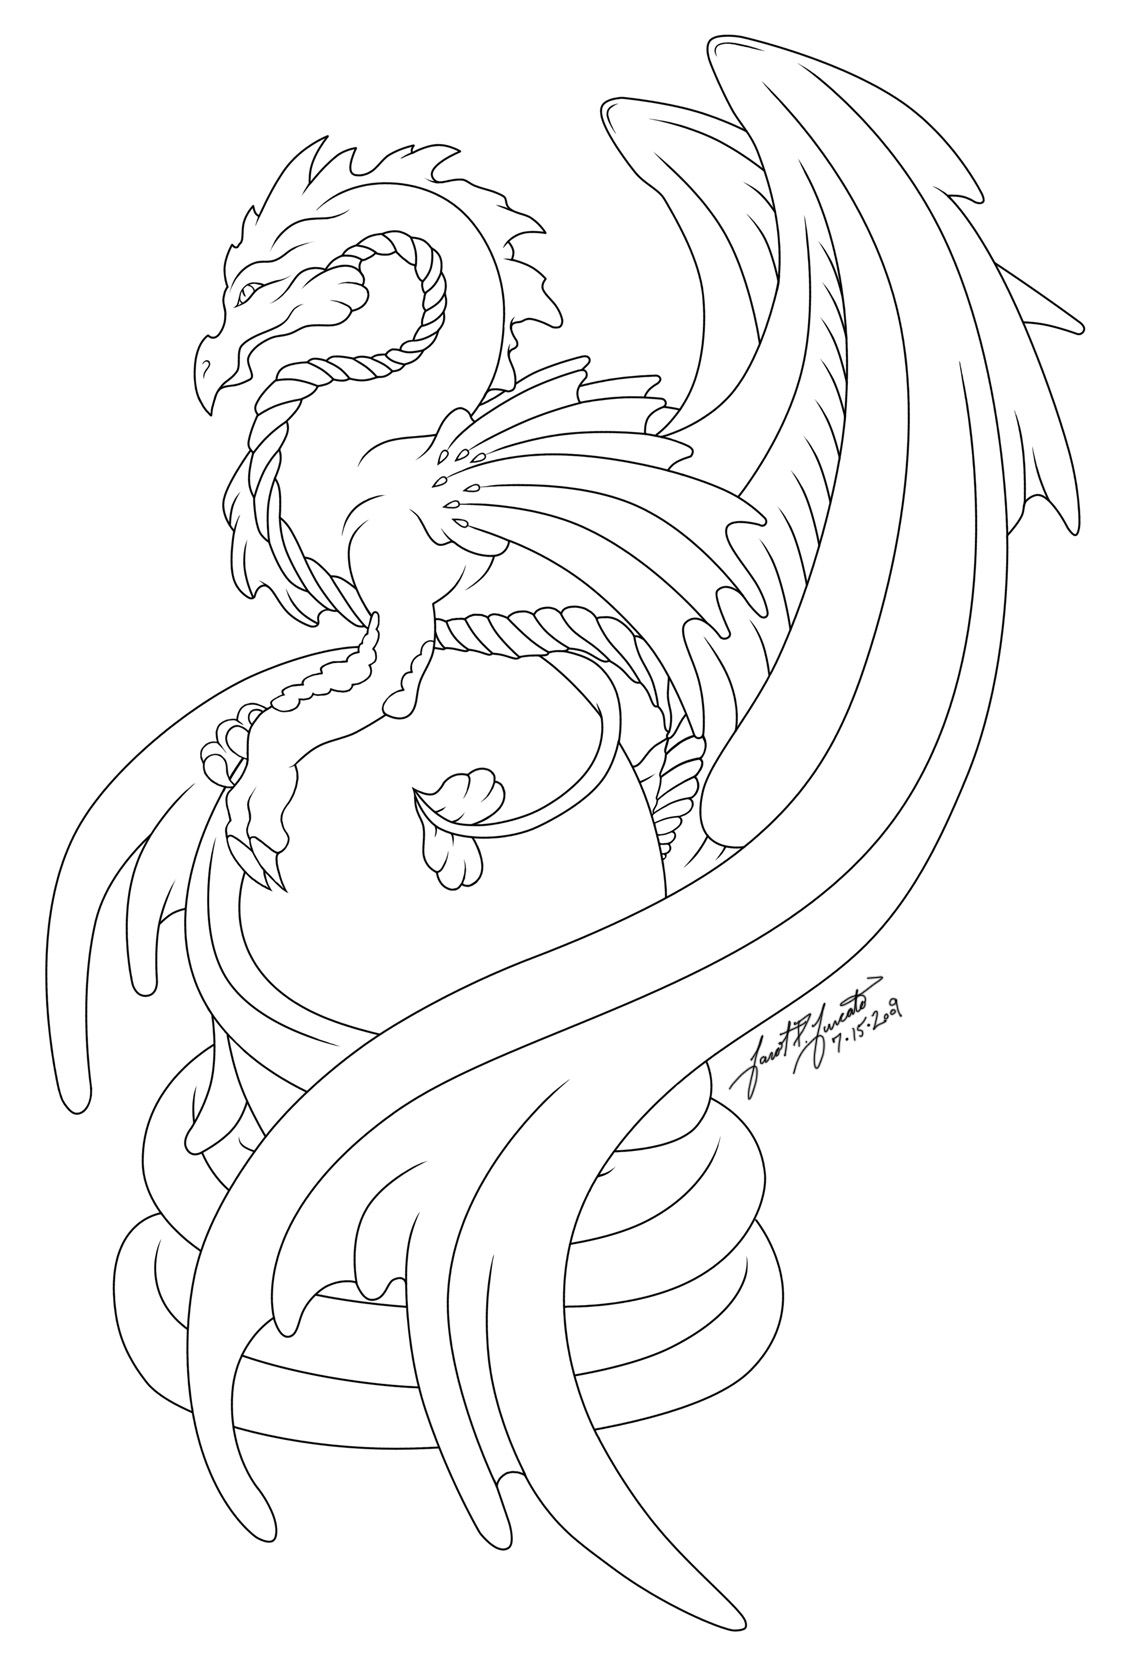 Dragon's Egg :Line Art: by PulseDragon on deviantART | Dragon coloring page,  Coloring pages, Dragon art